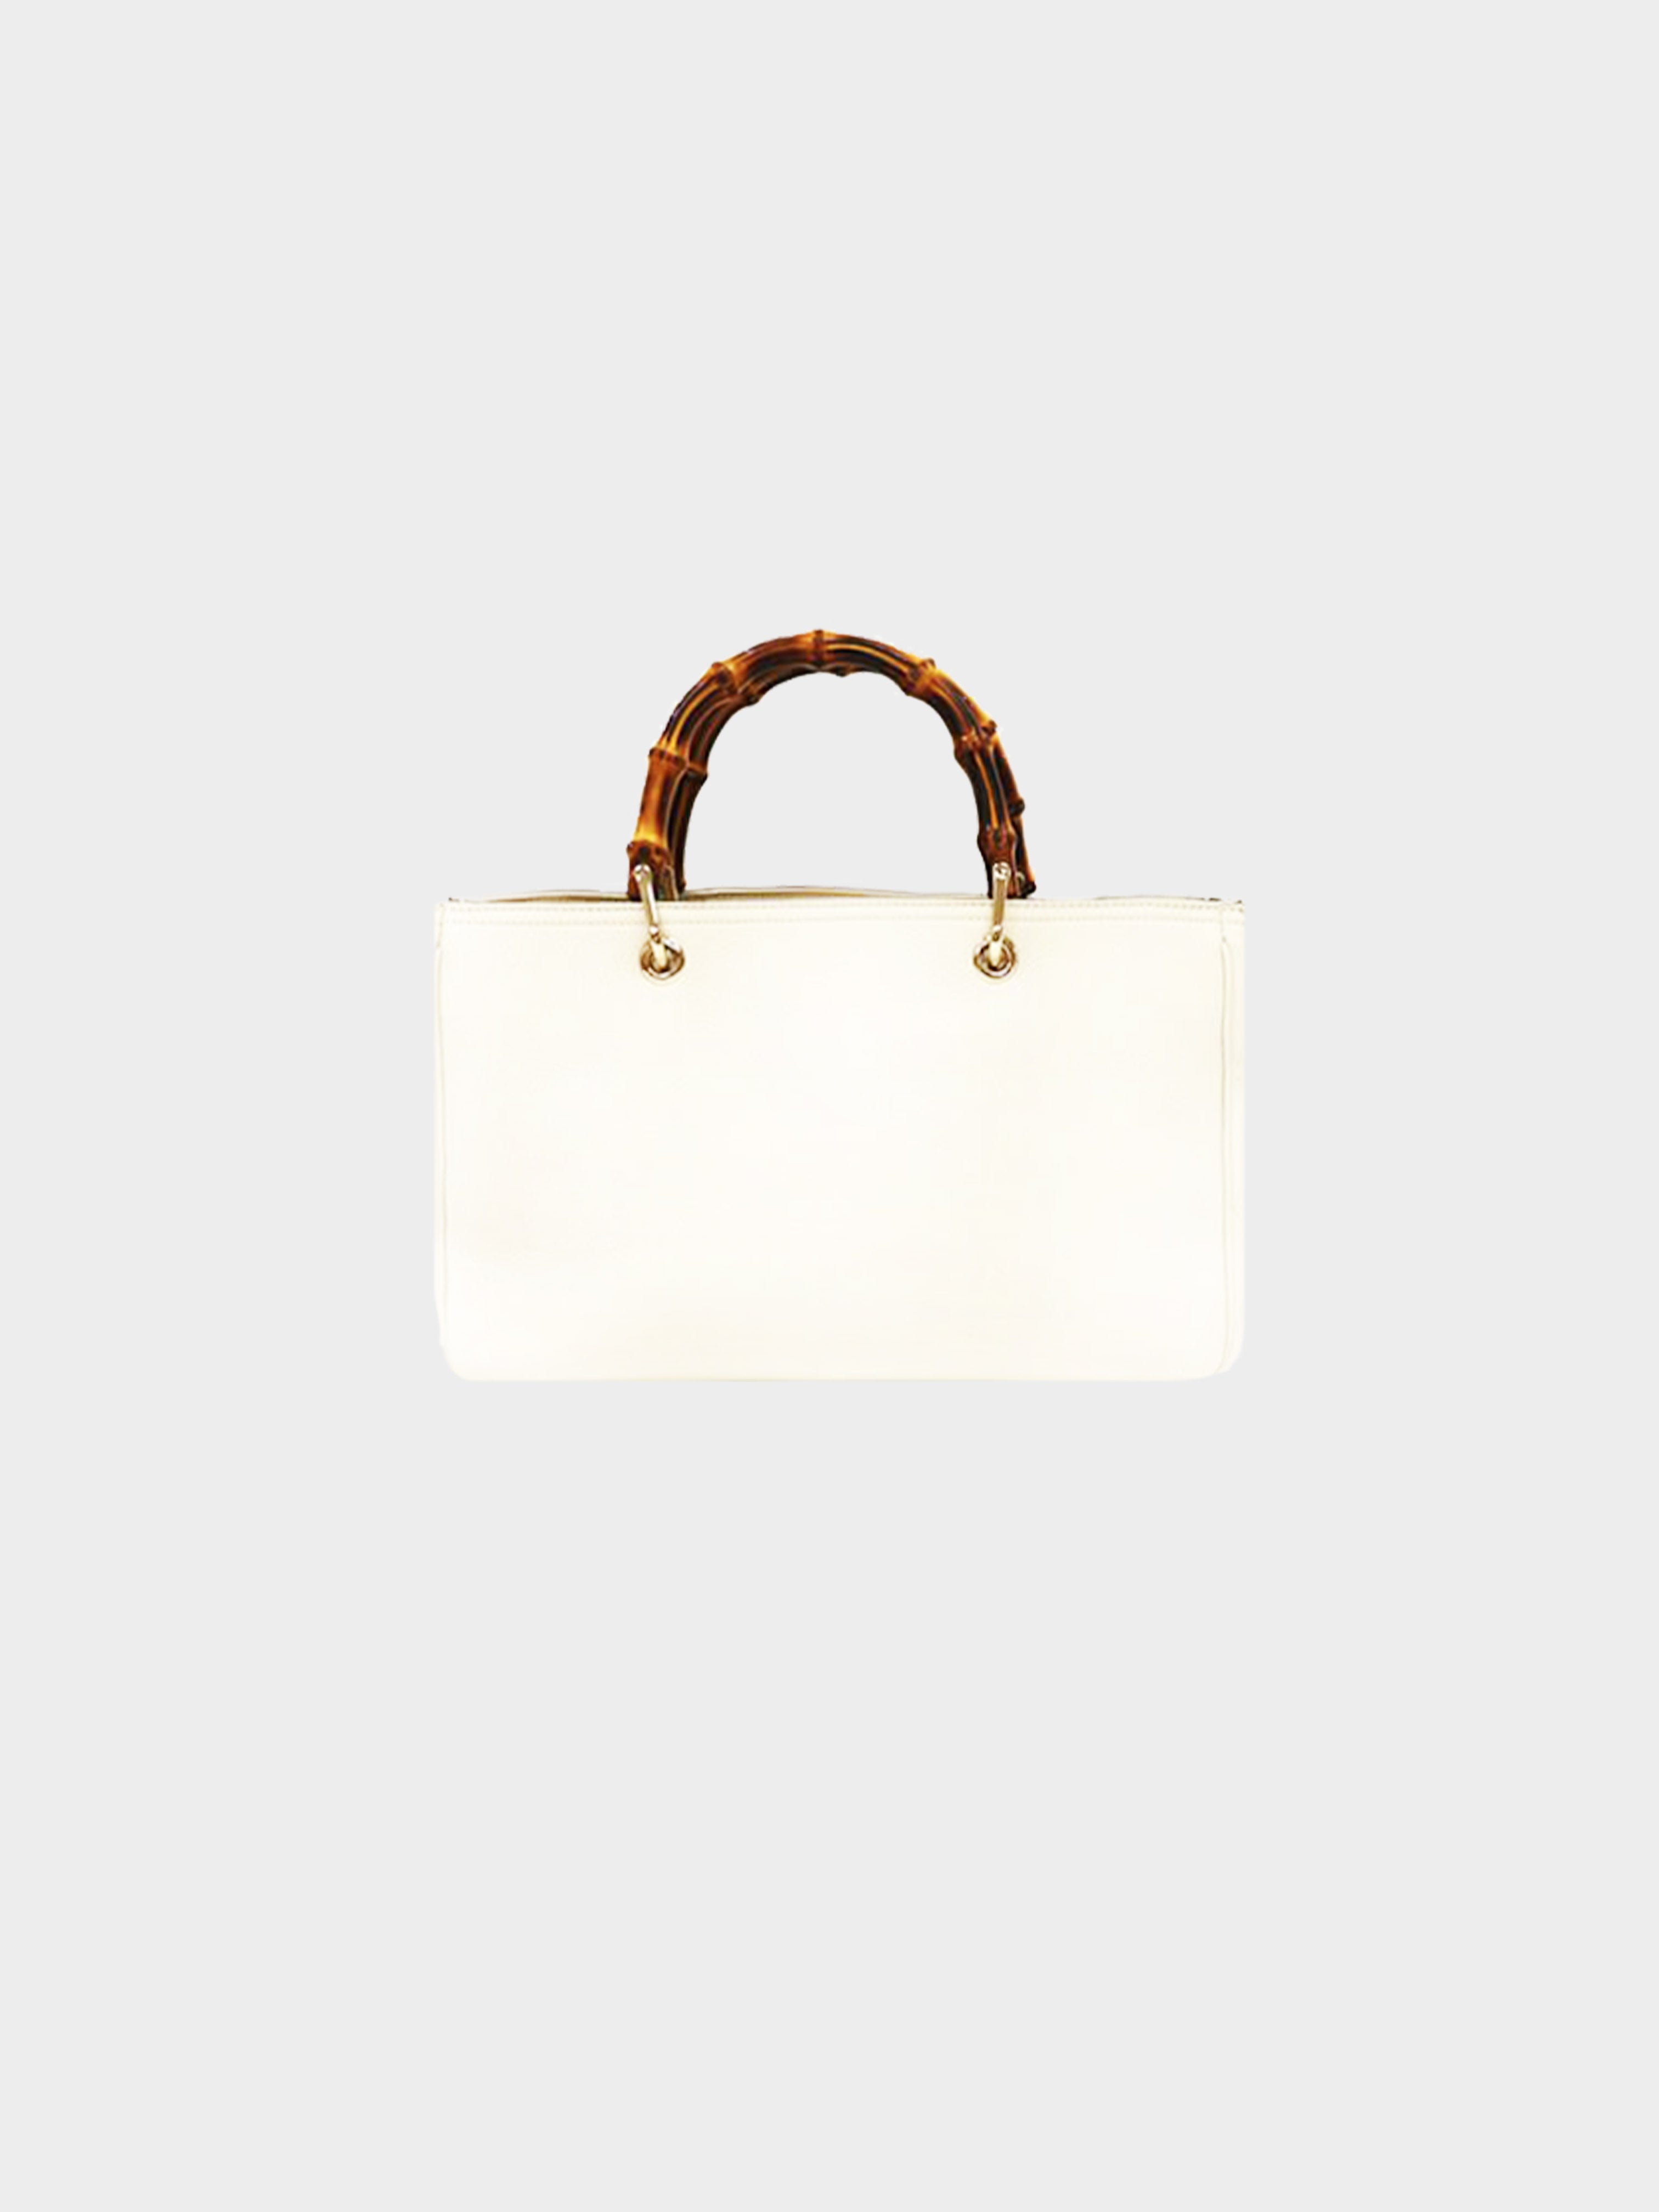 Gucci Bamboo 1947 small top handle bag in white leather